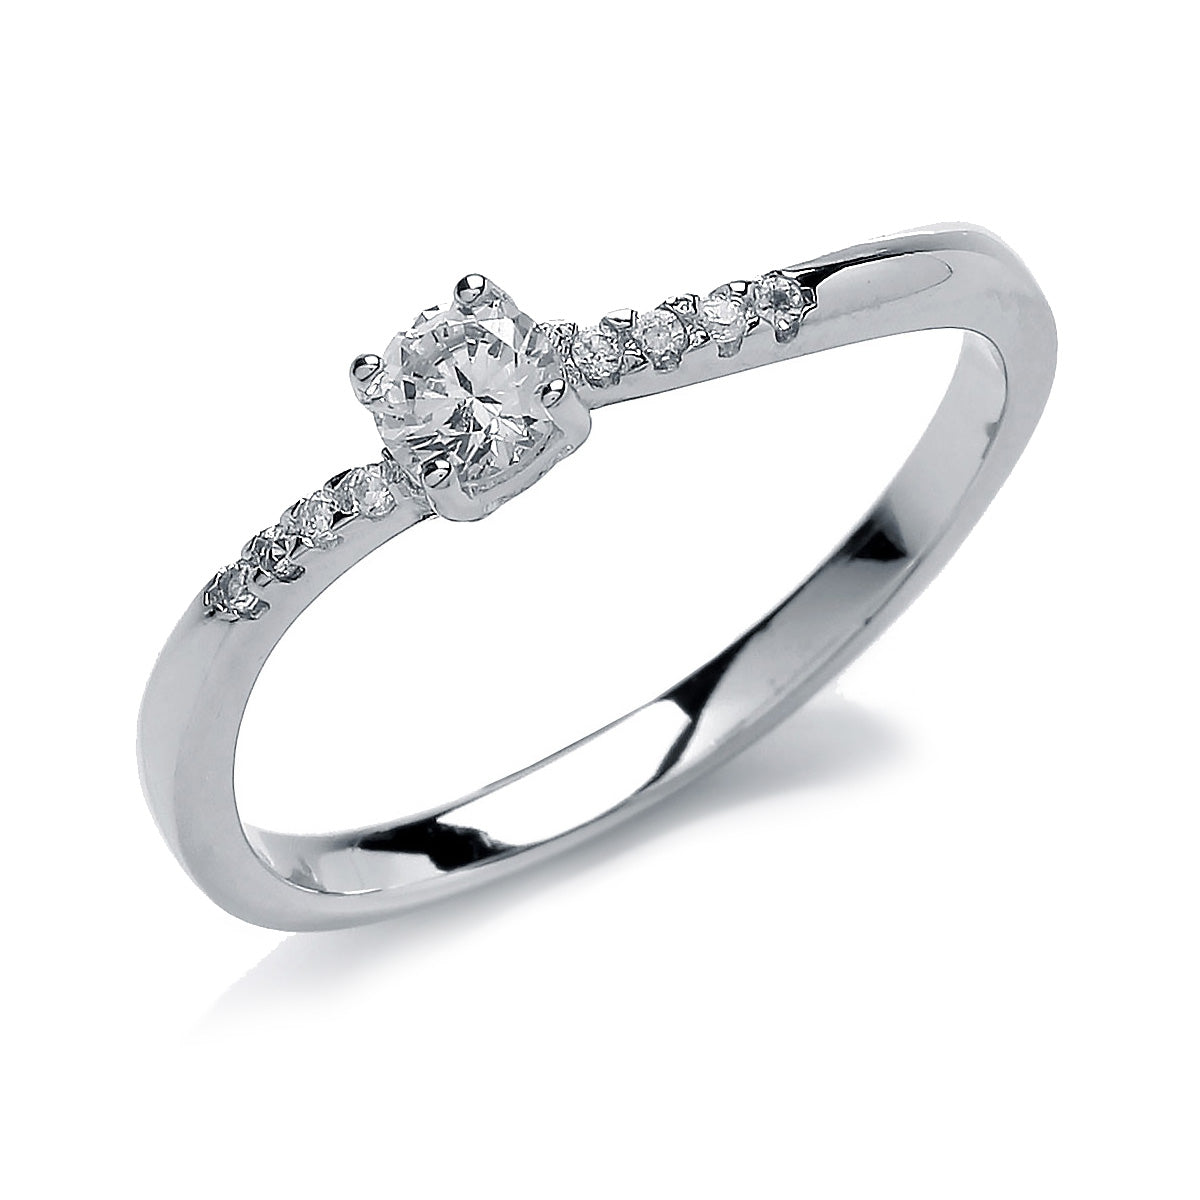 Silver  CZ Shoulder-Set 4 Claw Solitaire Engagement Ring - GVR720